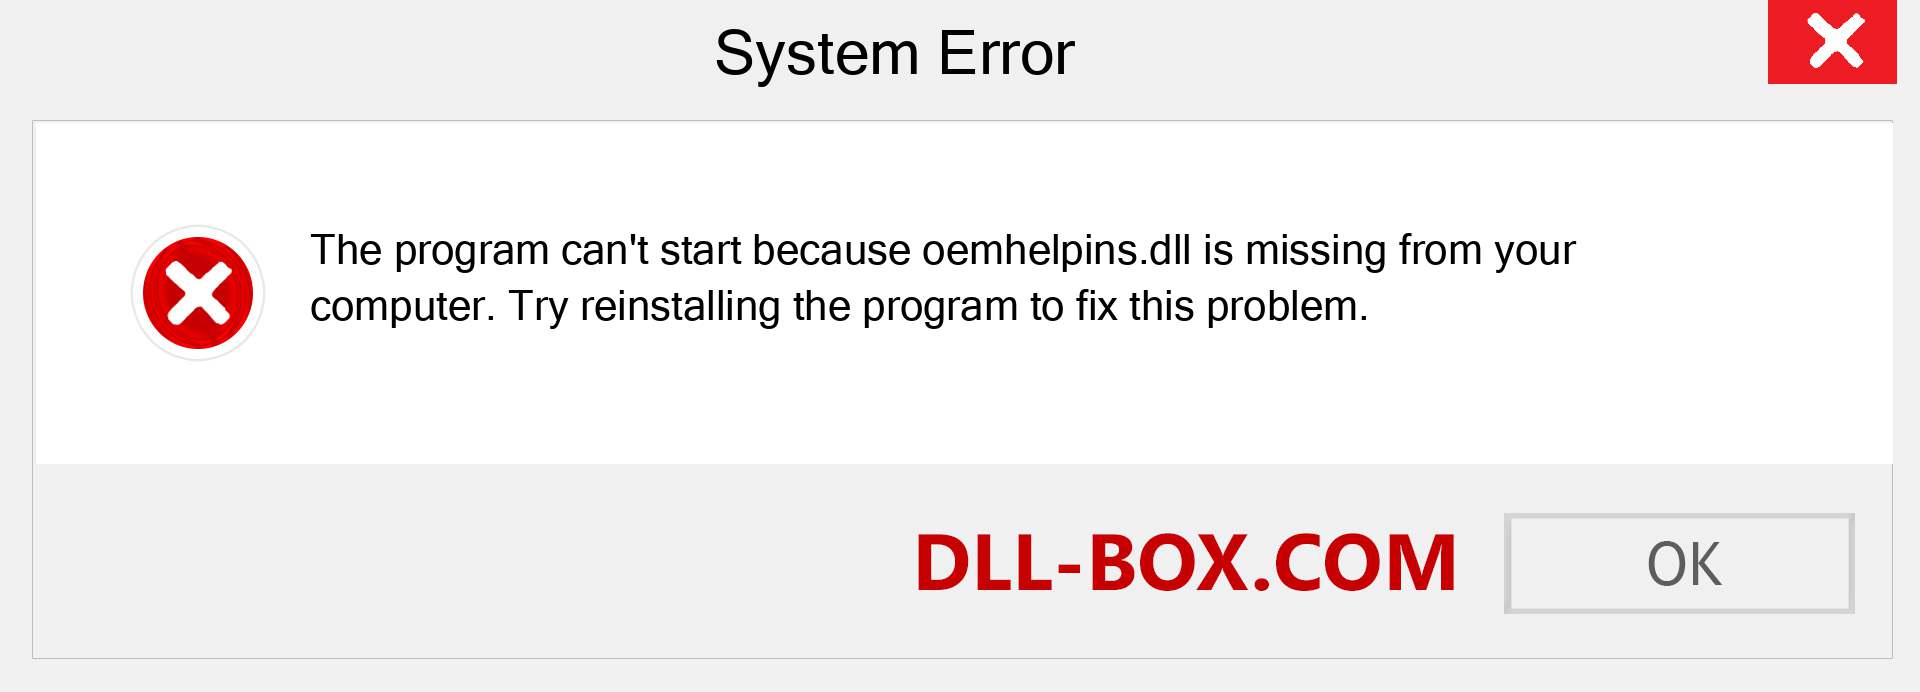  oemhelpins.dll file is missing?. Download for Windows 7, 8, 10 - Fix  oemhelpins dll Missing Error on Windows, photos, images